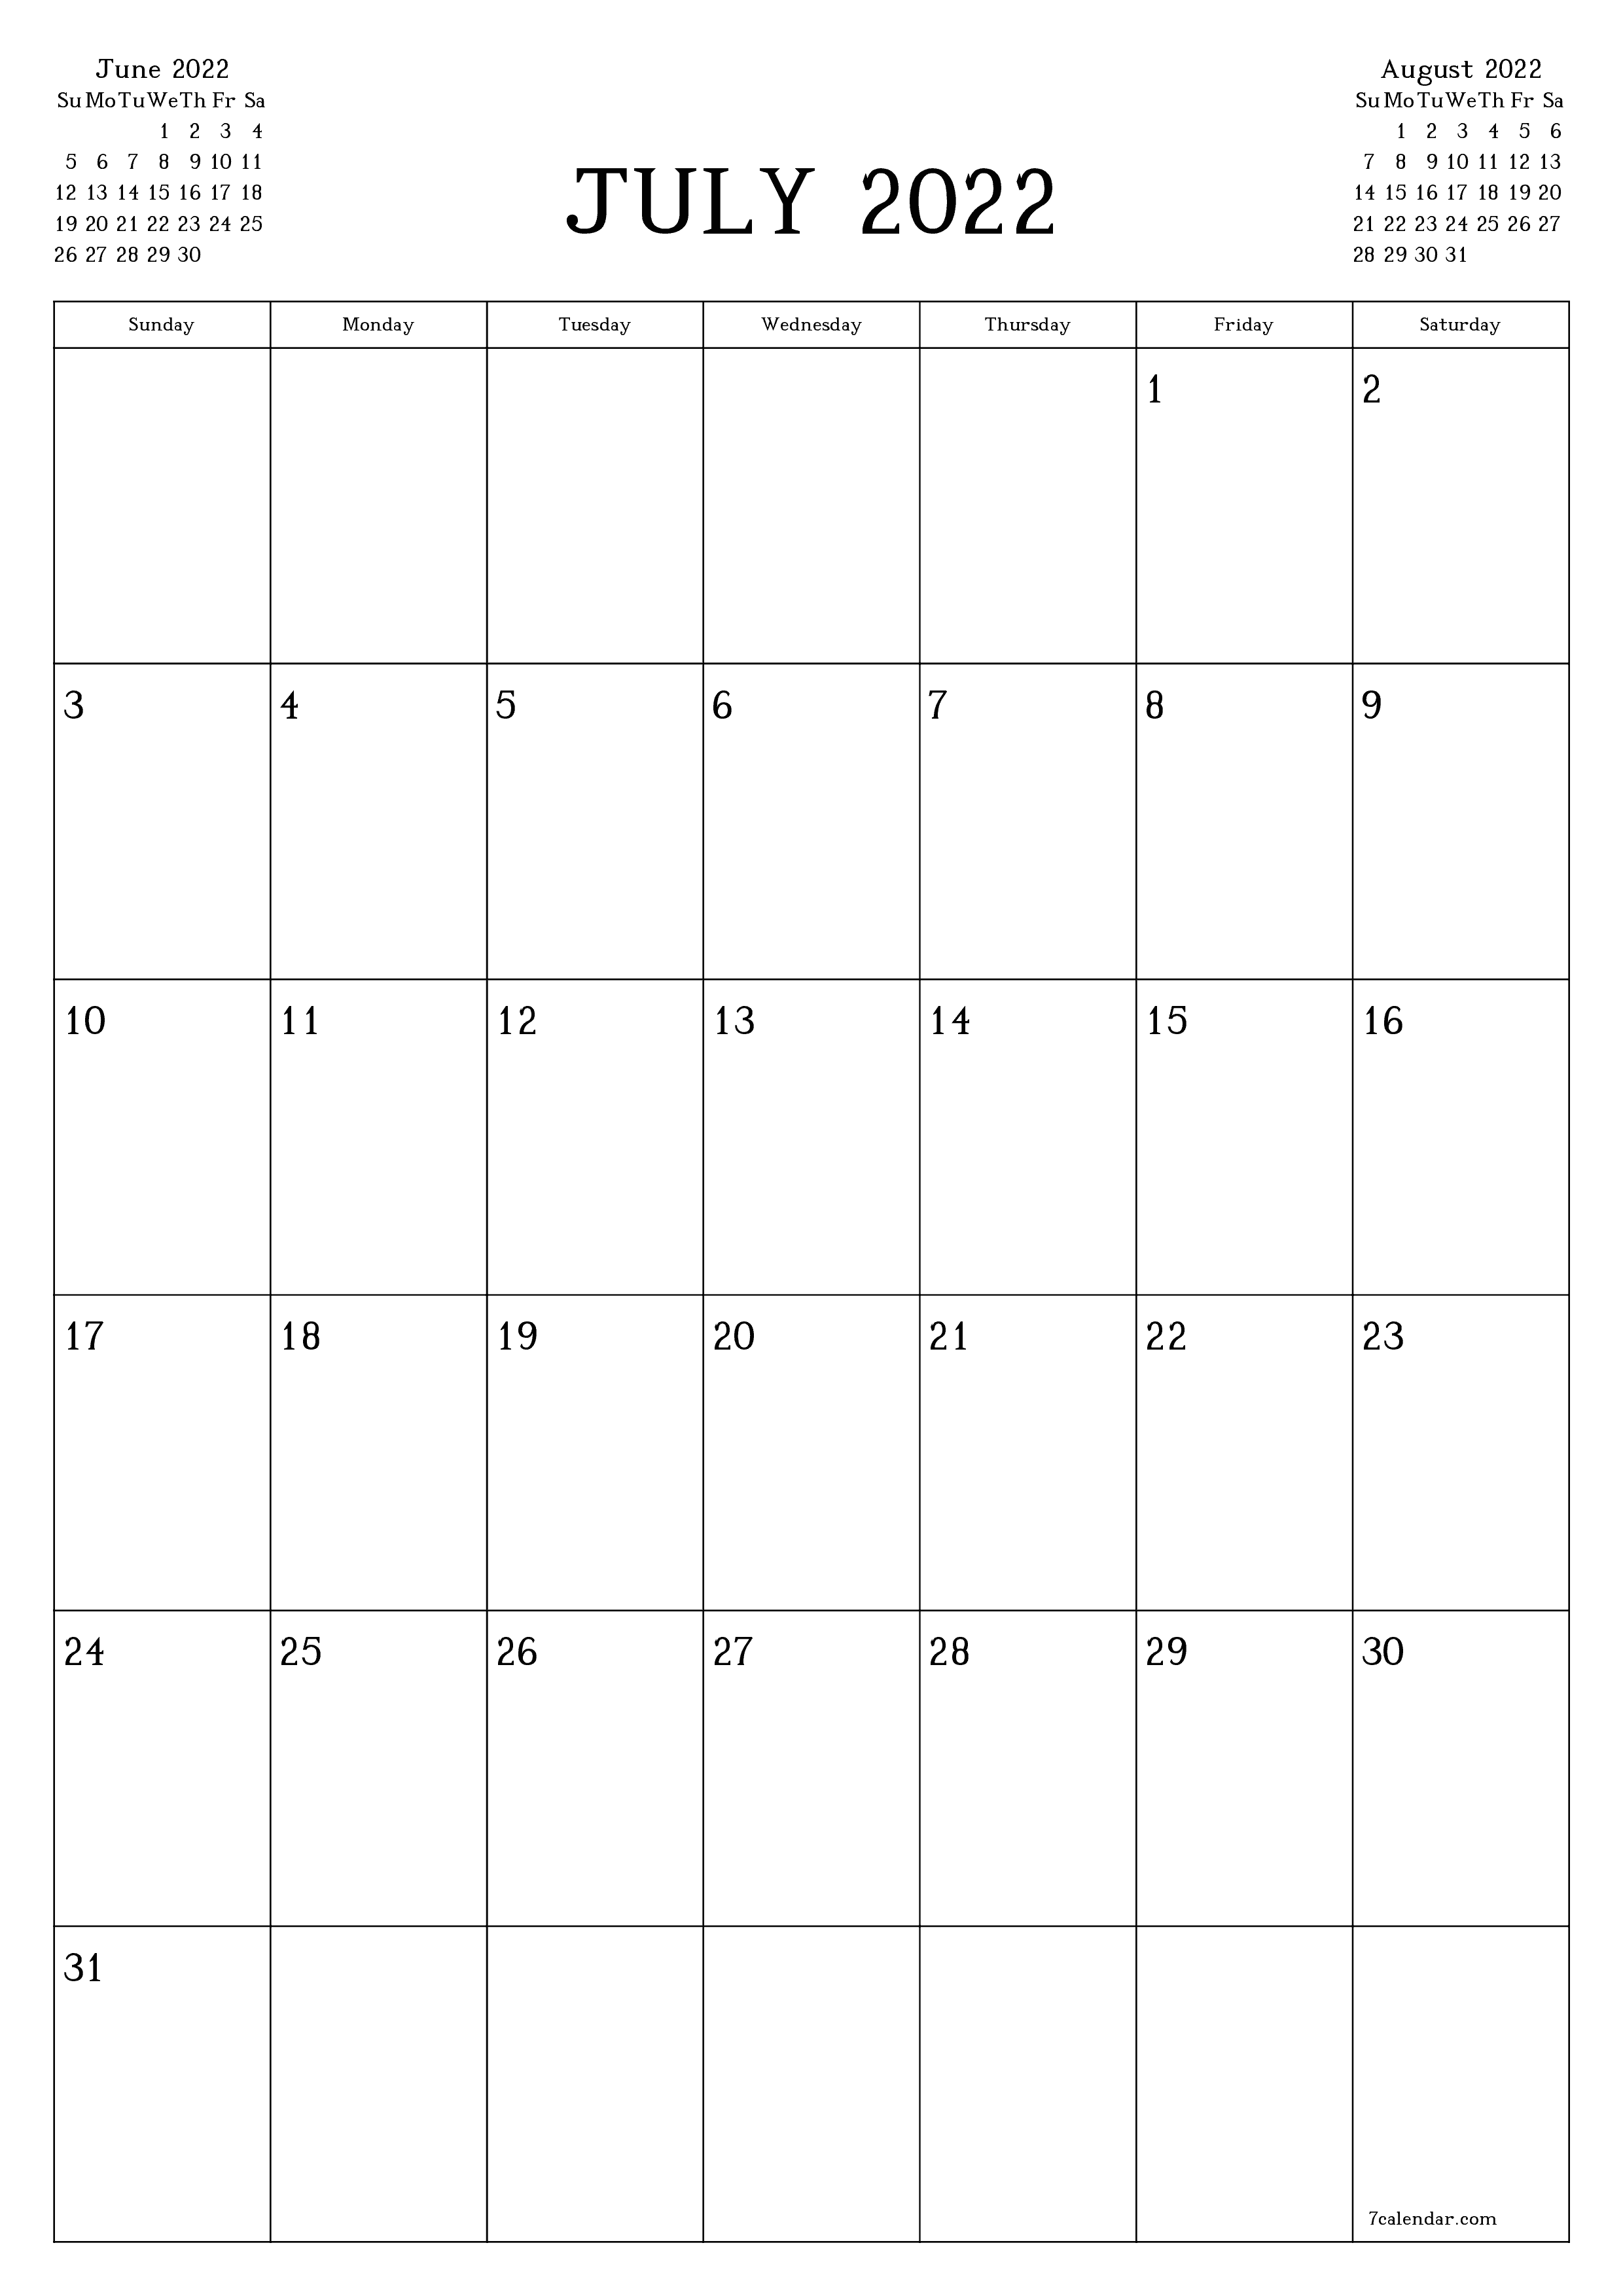 Blank monthly printable calendar and planner for month July 2022 with notes save and print to PDF PNG English - 7calendar.com